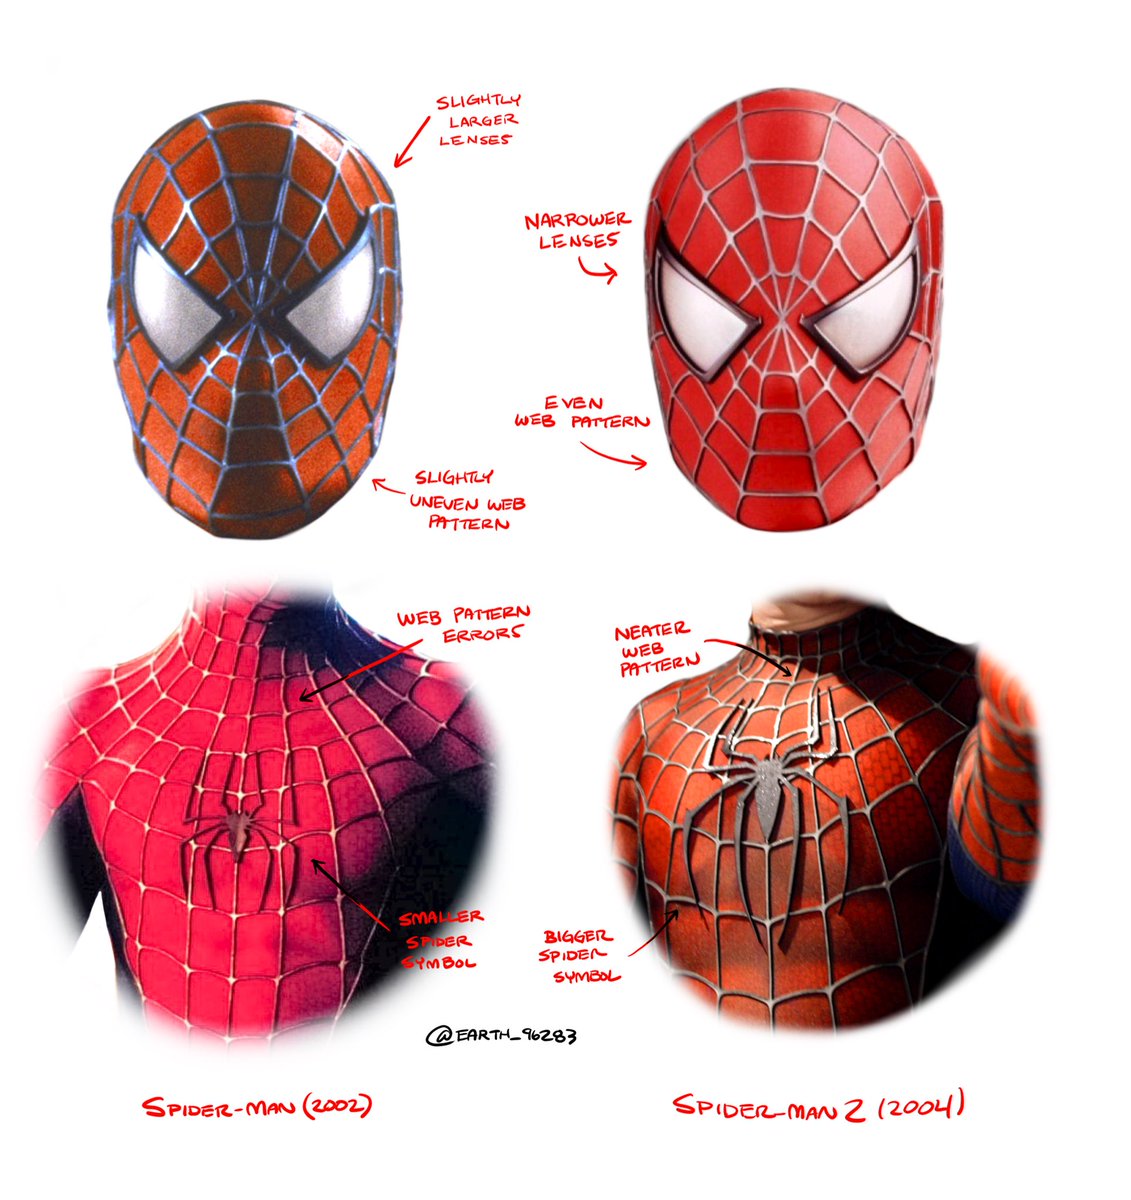 RT @EARTH_96283: The most noticeable differences between the Spider-Man (2002) suit and the Spider-Man 2 (2004) suit https://t.co/q7oVCbzFNp